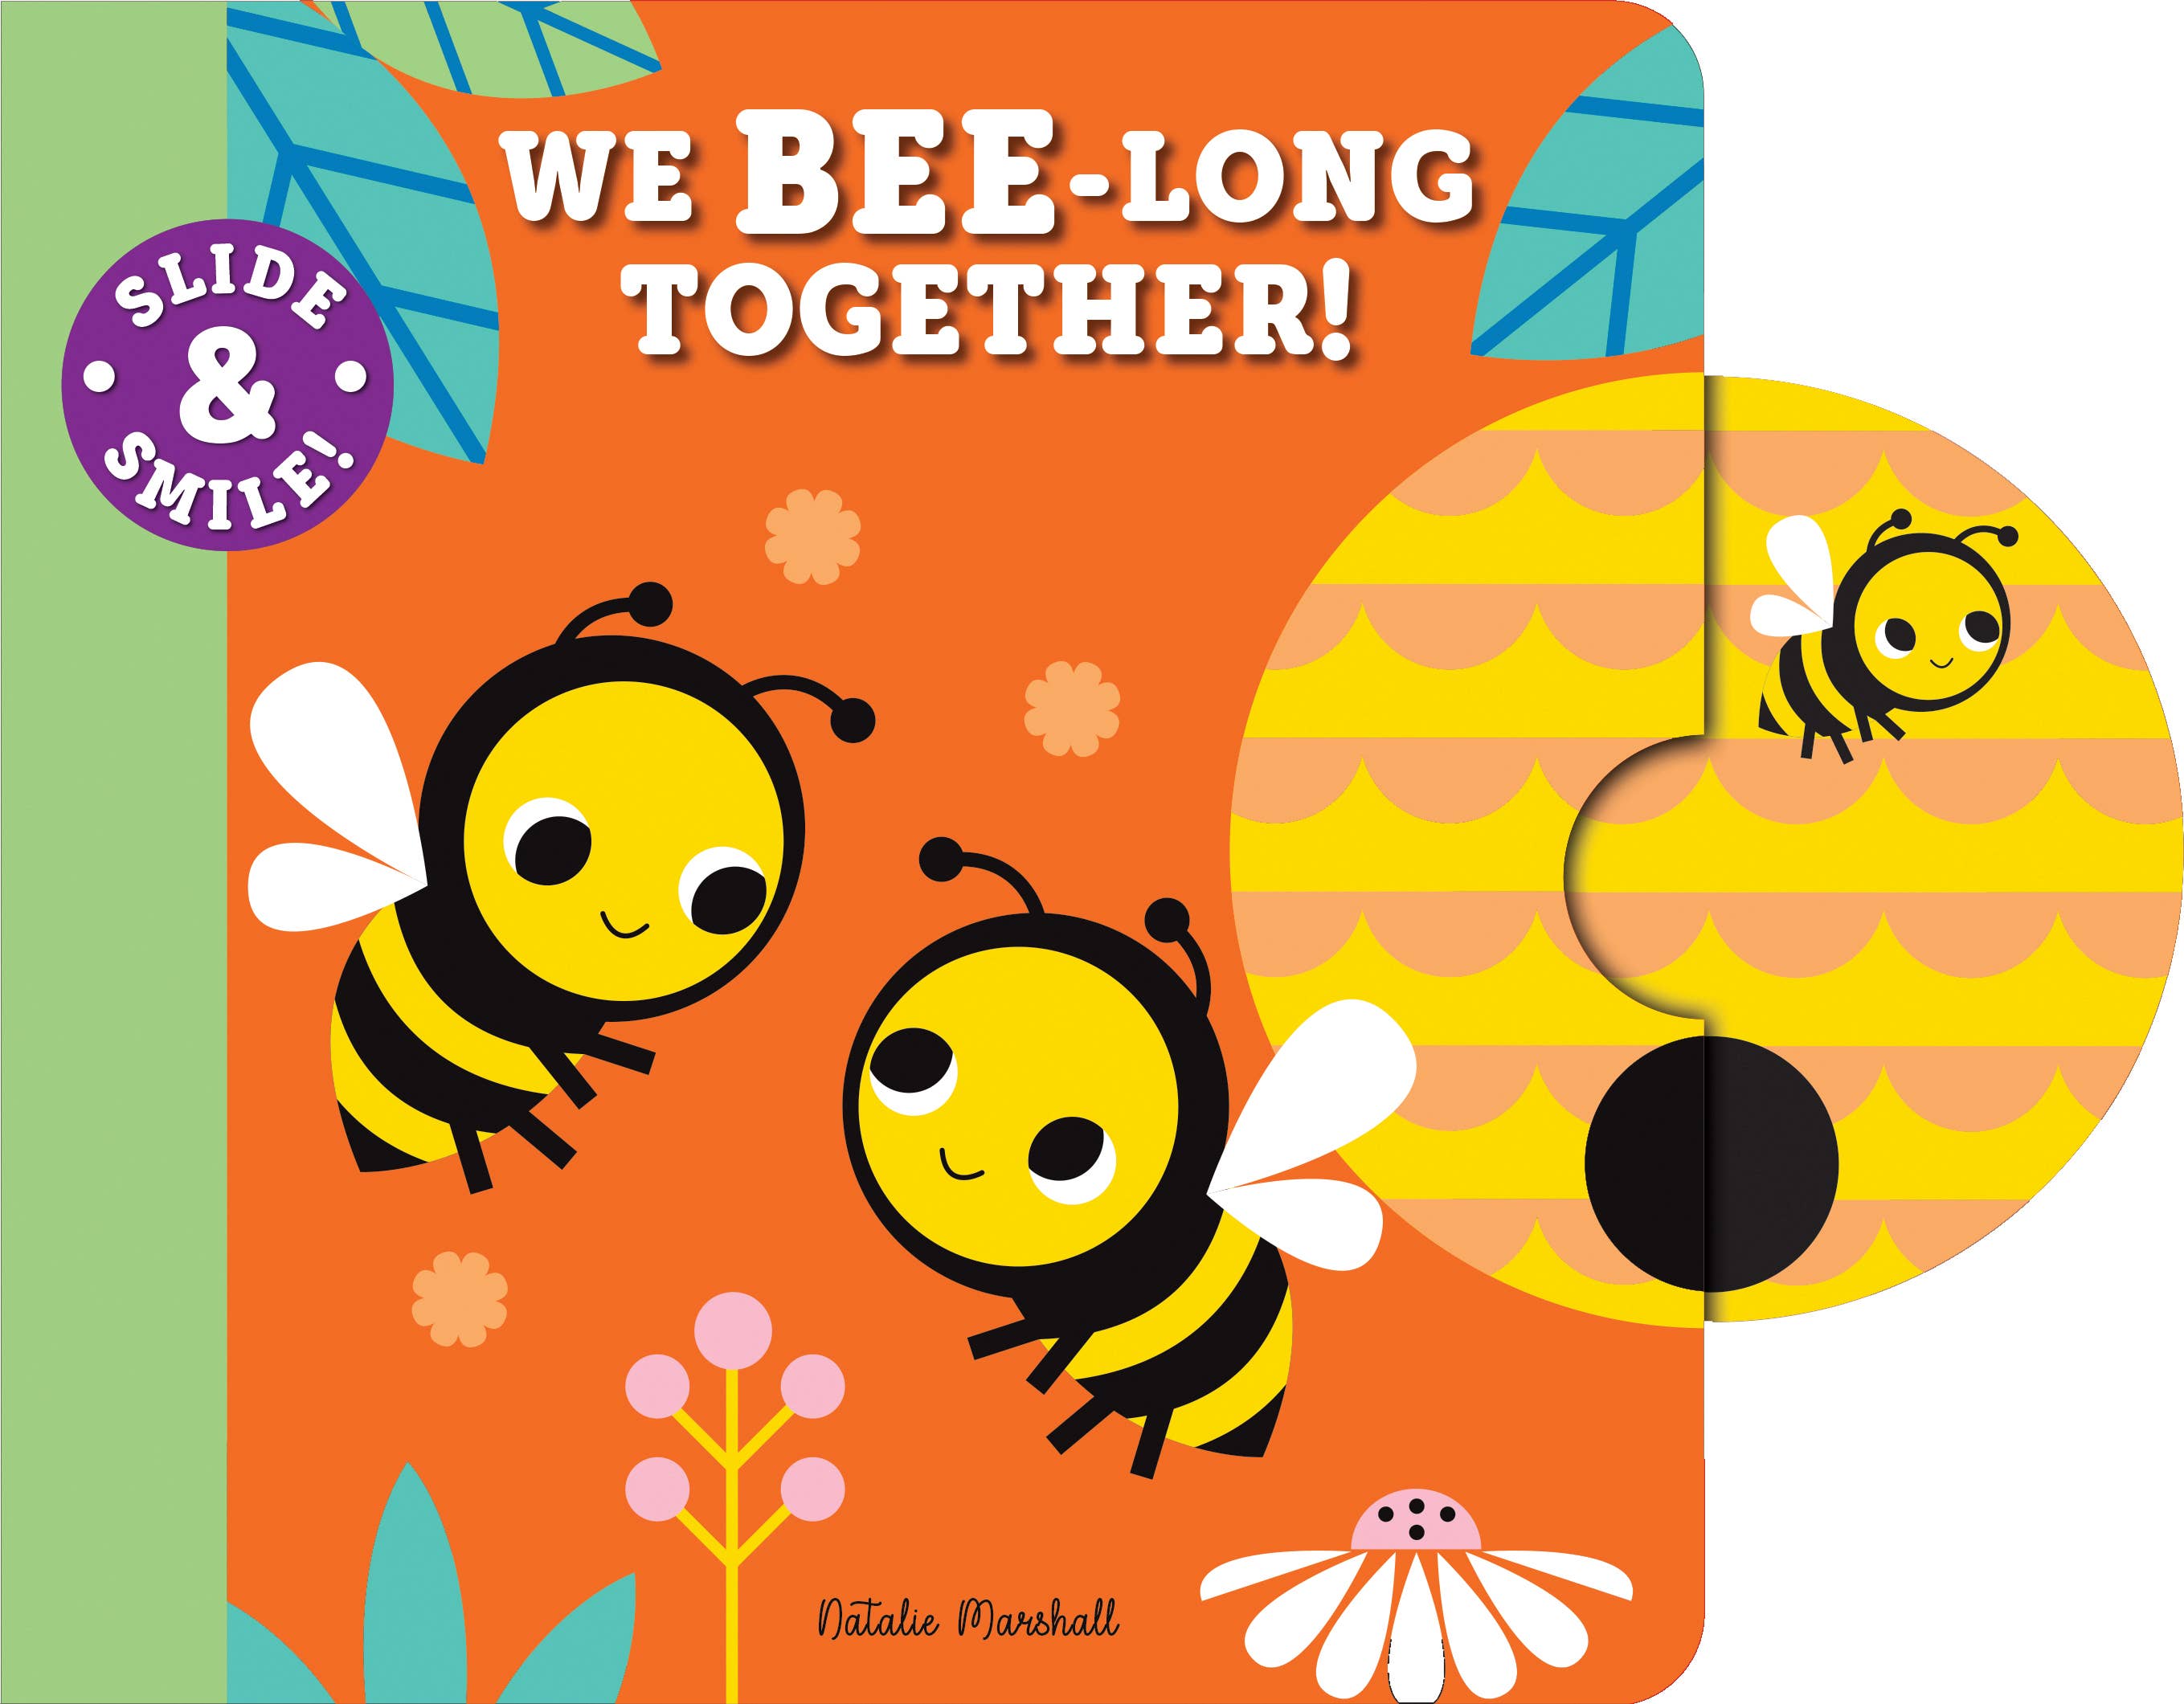 Slide and Smile: We Bee-long Together! - Board Book